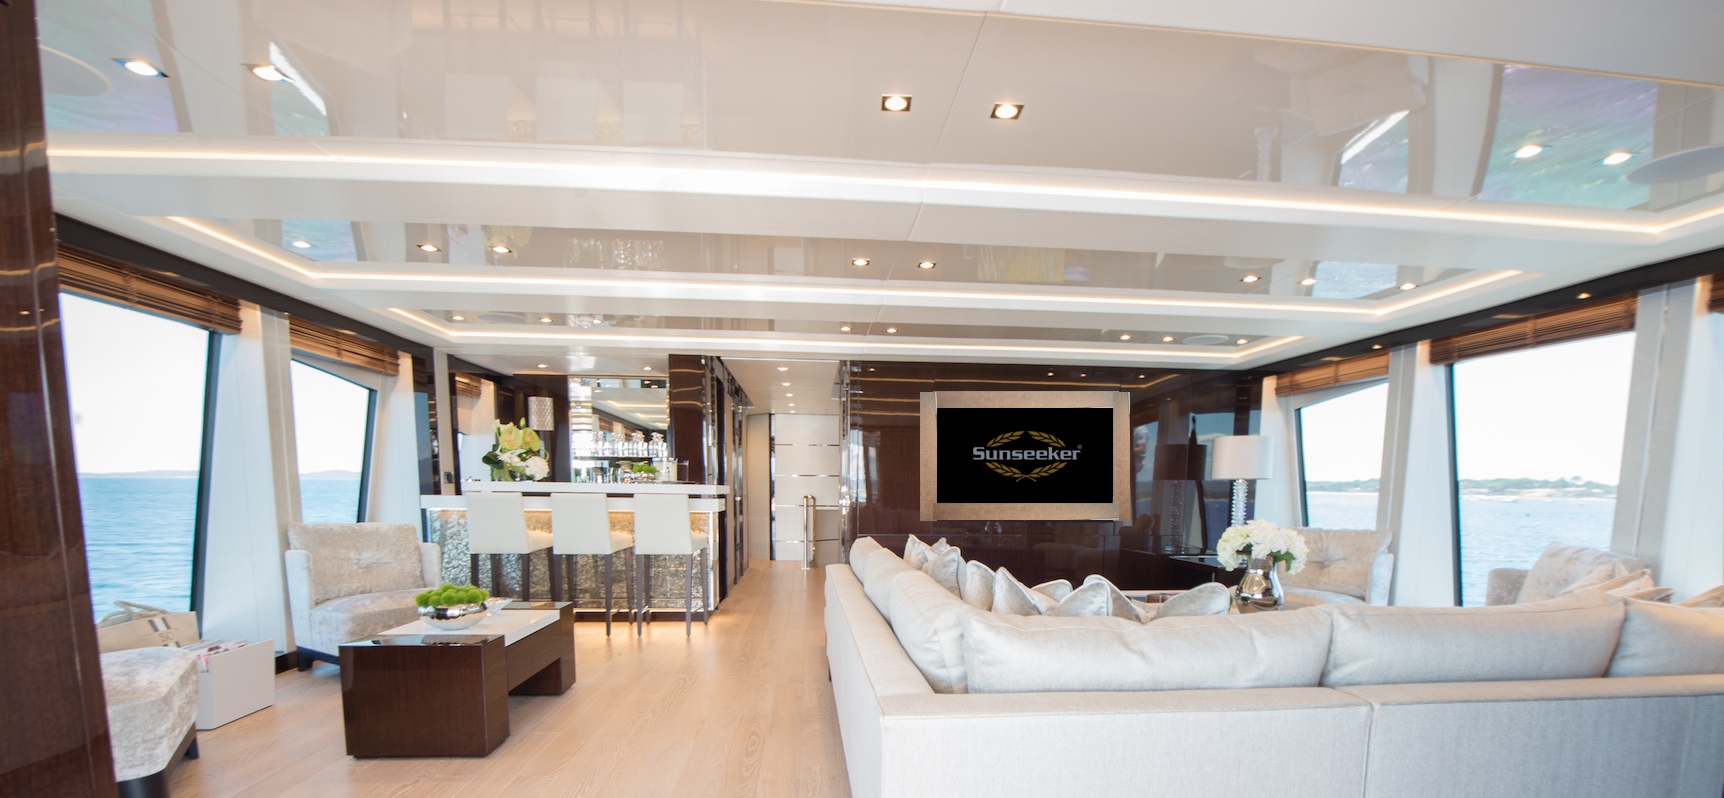 Sunseeker Aqua Libra super yacht charter luxury indoor cabin with bed - High Point Yachting